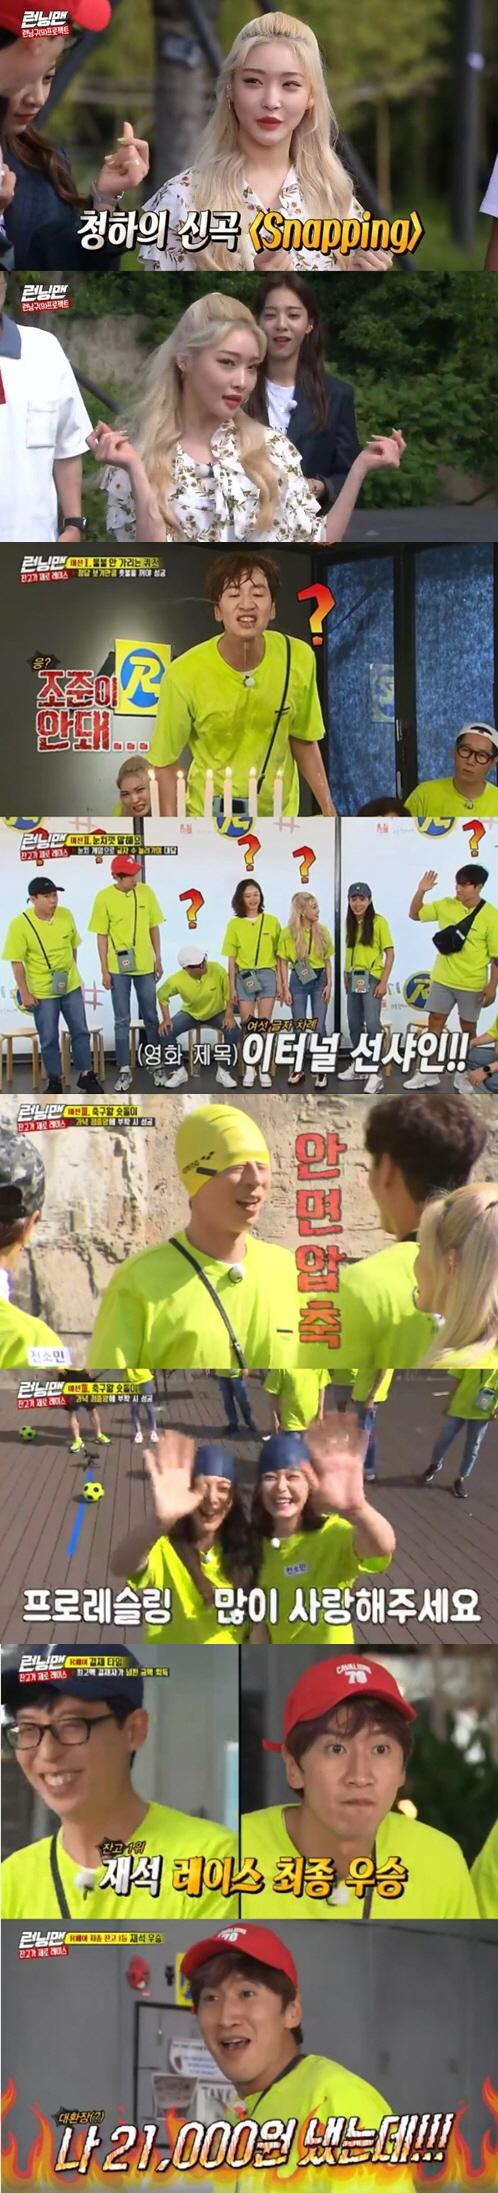 SBS Running Man kept the top spot in the same time zone of 2049 target audience rating.The show was decorated with Zero-Race with a balance, and was accompanied by Best Friend singer Cheongha and actor Seol In-ah as guests. In this race, the members received a mission phone with 30,000 won each.As you want to pay for food expenses by going around a restaurant, you should pay privately with R Pay. If the final amount is insufficient after payment, you should pay the shortest amount of money with the last person and the least person in each round mission.However, if the final amount is overflowing, the person who paid the highest amount will acquire all the difference.The members had a fierce sense of action from the beginning, especially in the last round, there was a penalty to write a humiliation hat.With an unexpected big smile, each member laughed with an extreme sense of fighting as the payment order came to an end, and the scene won the Best One Minute with the highest audience rating of 8% per minute.On the other hand, Seol In-ah was punished for water bombs with a large payment every round, and Lee Kwang-soo made a strategy to all-in-one on the last mission, but he was hit by a water bomb, pushed by Yoo Jae-Suk, who had more than 1,000 won in assets even though it was the same strategy.Ji Seok-jin was named as a companion penalty of Seol In-ah, and he was punished with Seol In-ah and Lee Kwang-soo, and Yoo Jae-Suk became the final winner.In addition, Cheongha and Seol In-ah performed a joint stage of 12 oclock already as best friends, and Cheongha first unveiled a new song Snapping.